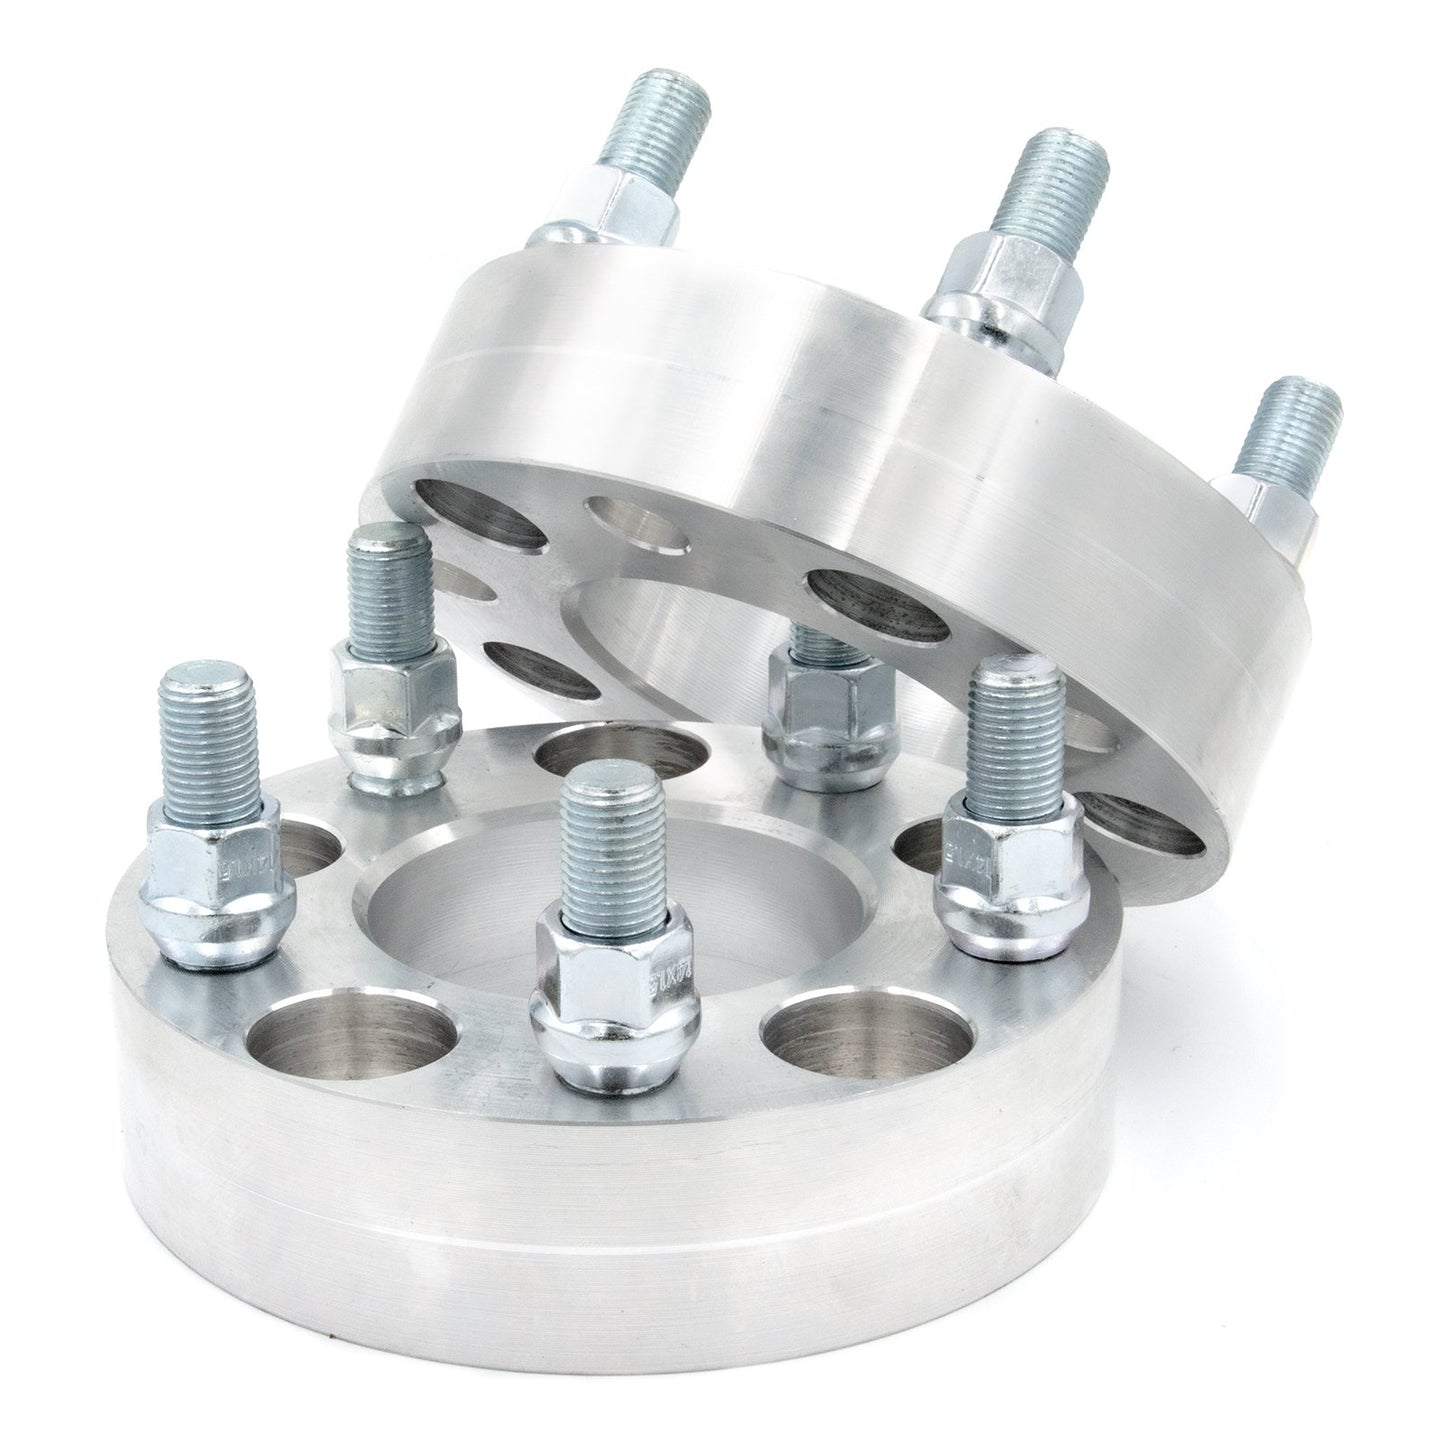 5x5" to 5x4.25" Wheel Spacer/Adapter - Thickness: 3/4"- 4"